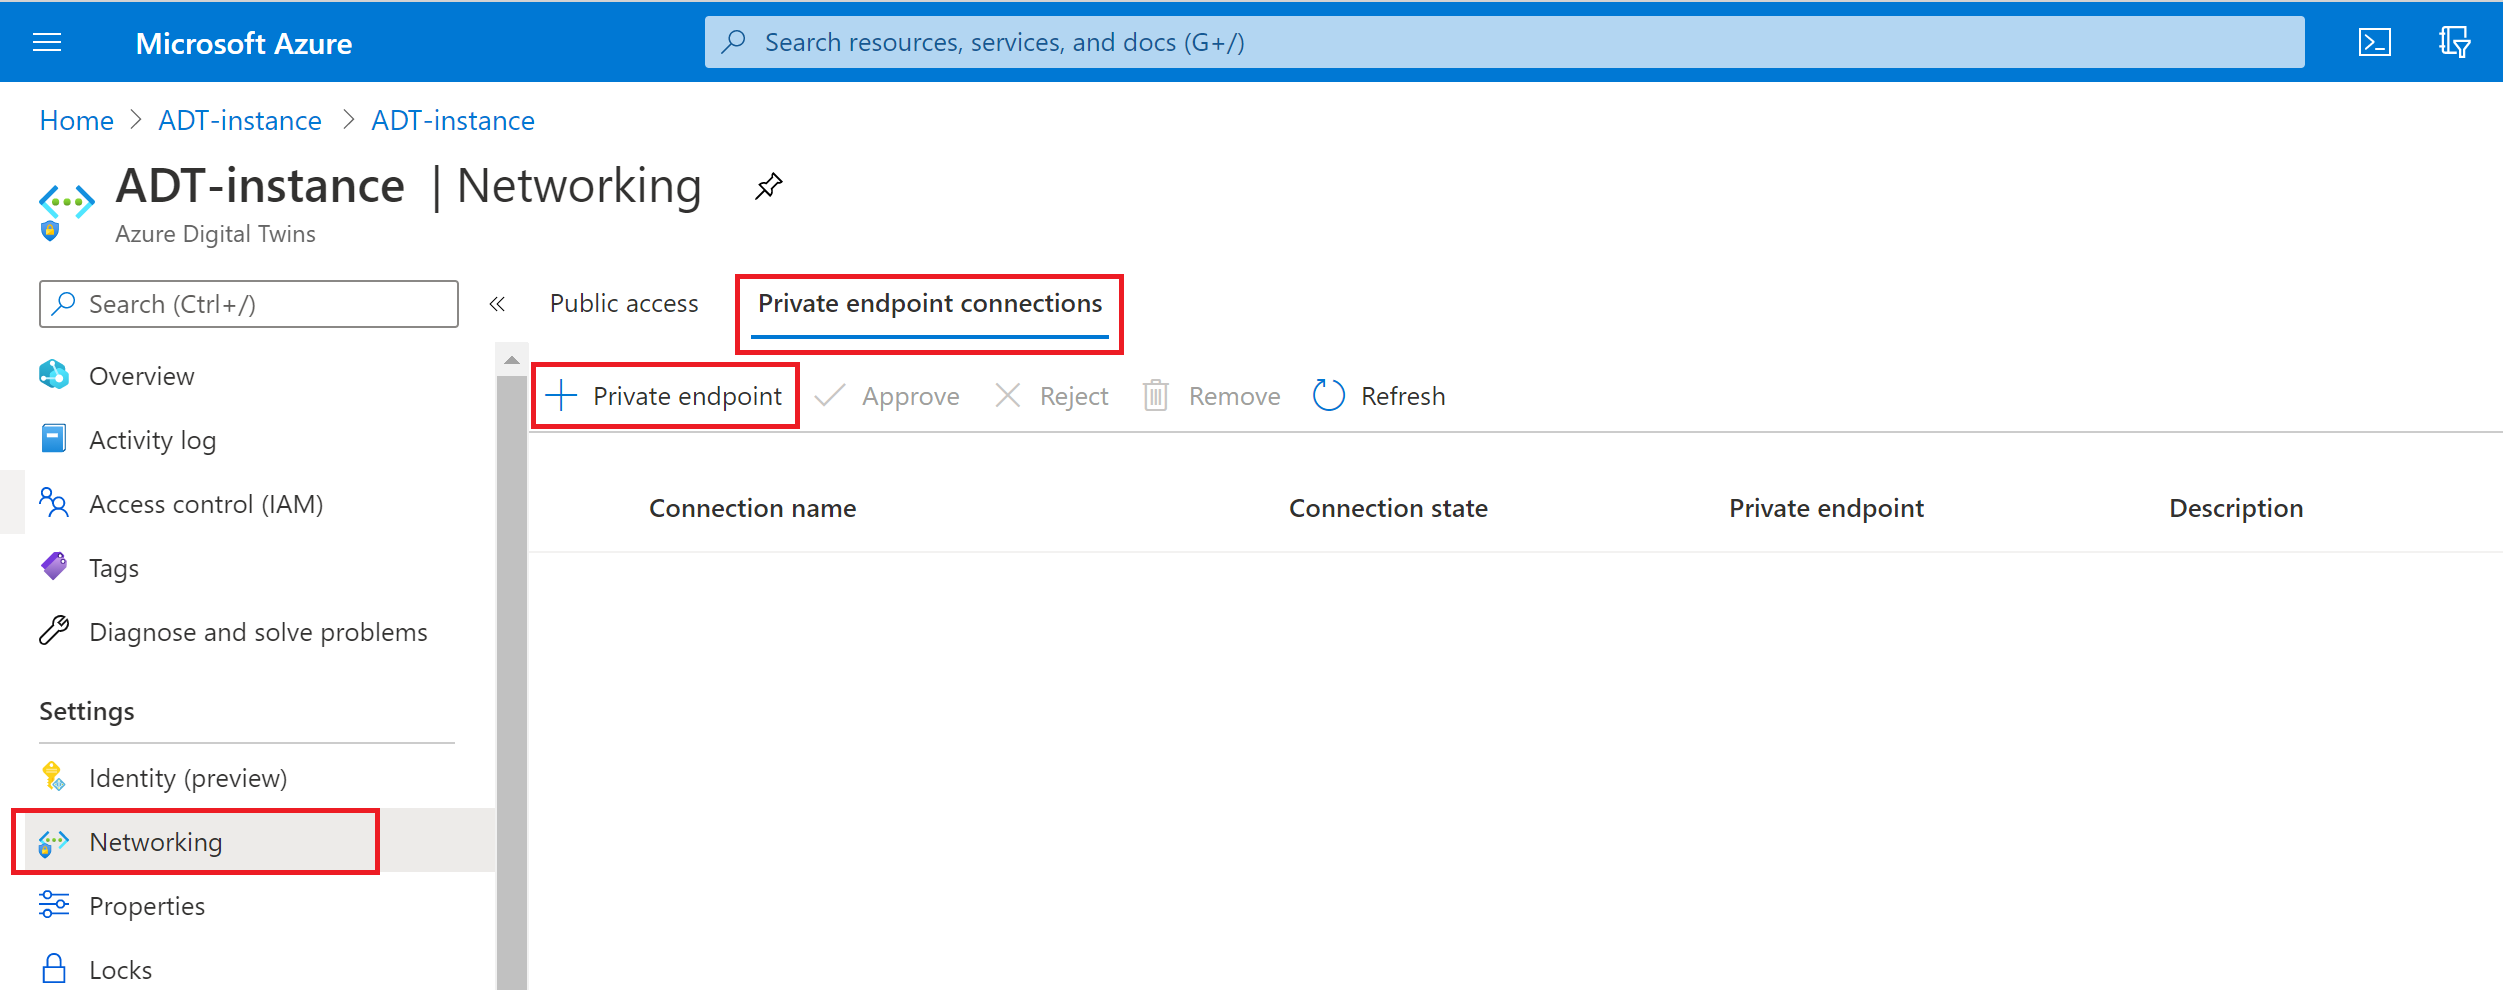 Screenshot of the Azure portal showing the Networking page for an existing Azure Digital Twins instance, highlighting how to create private endpoints.